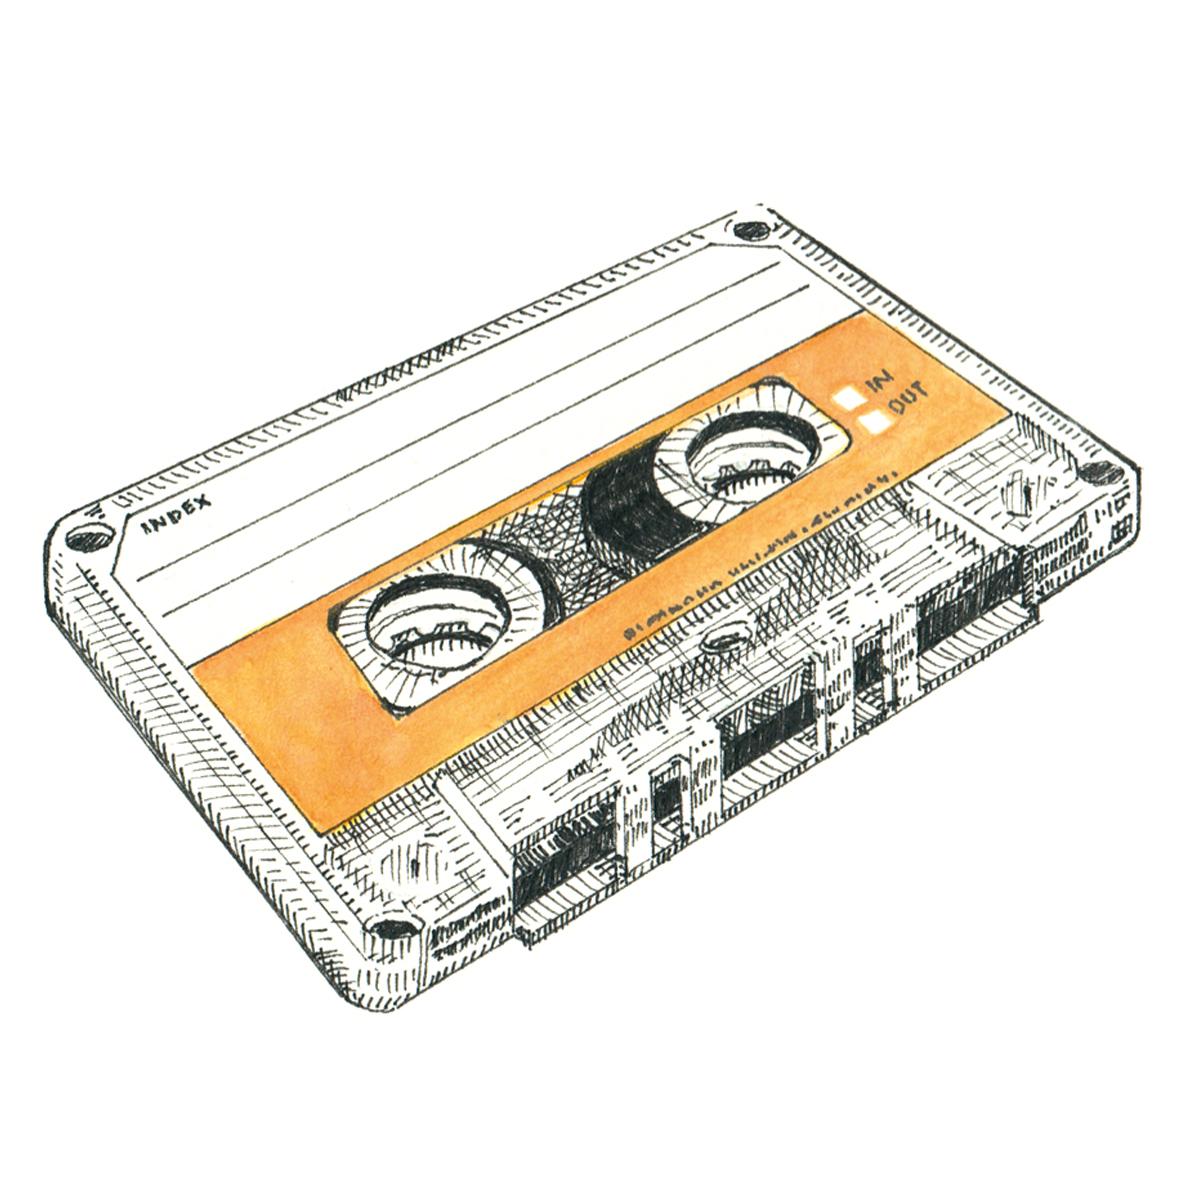 Limited edition print from pen, ink and watercolour sketch of a cassette tape